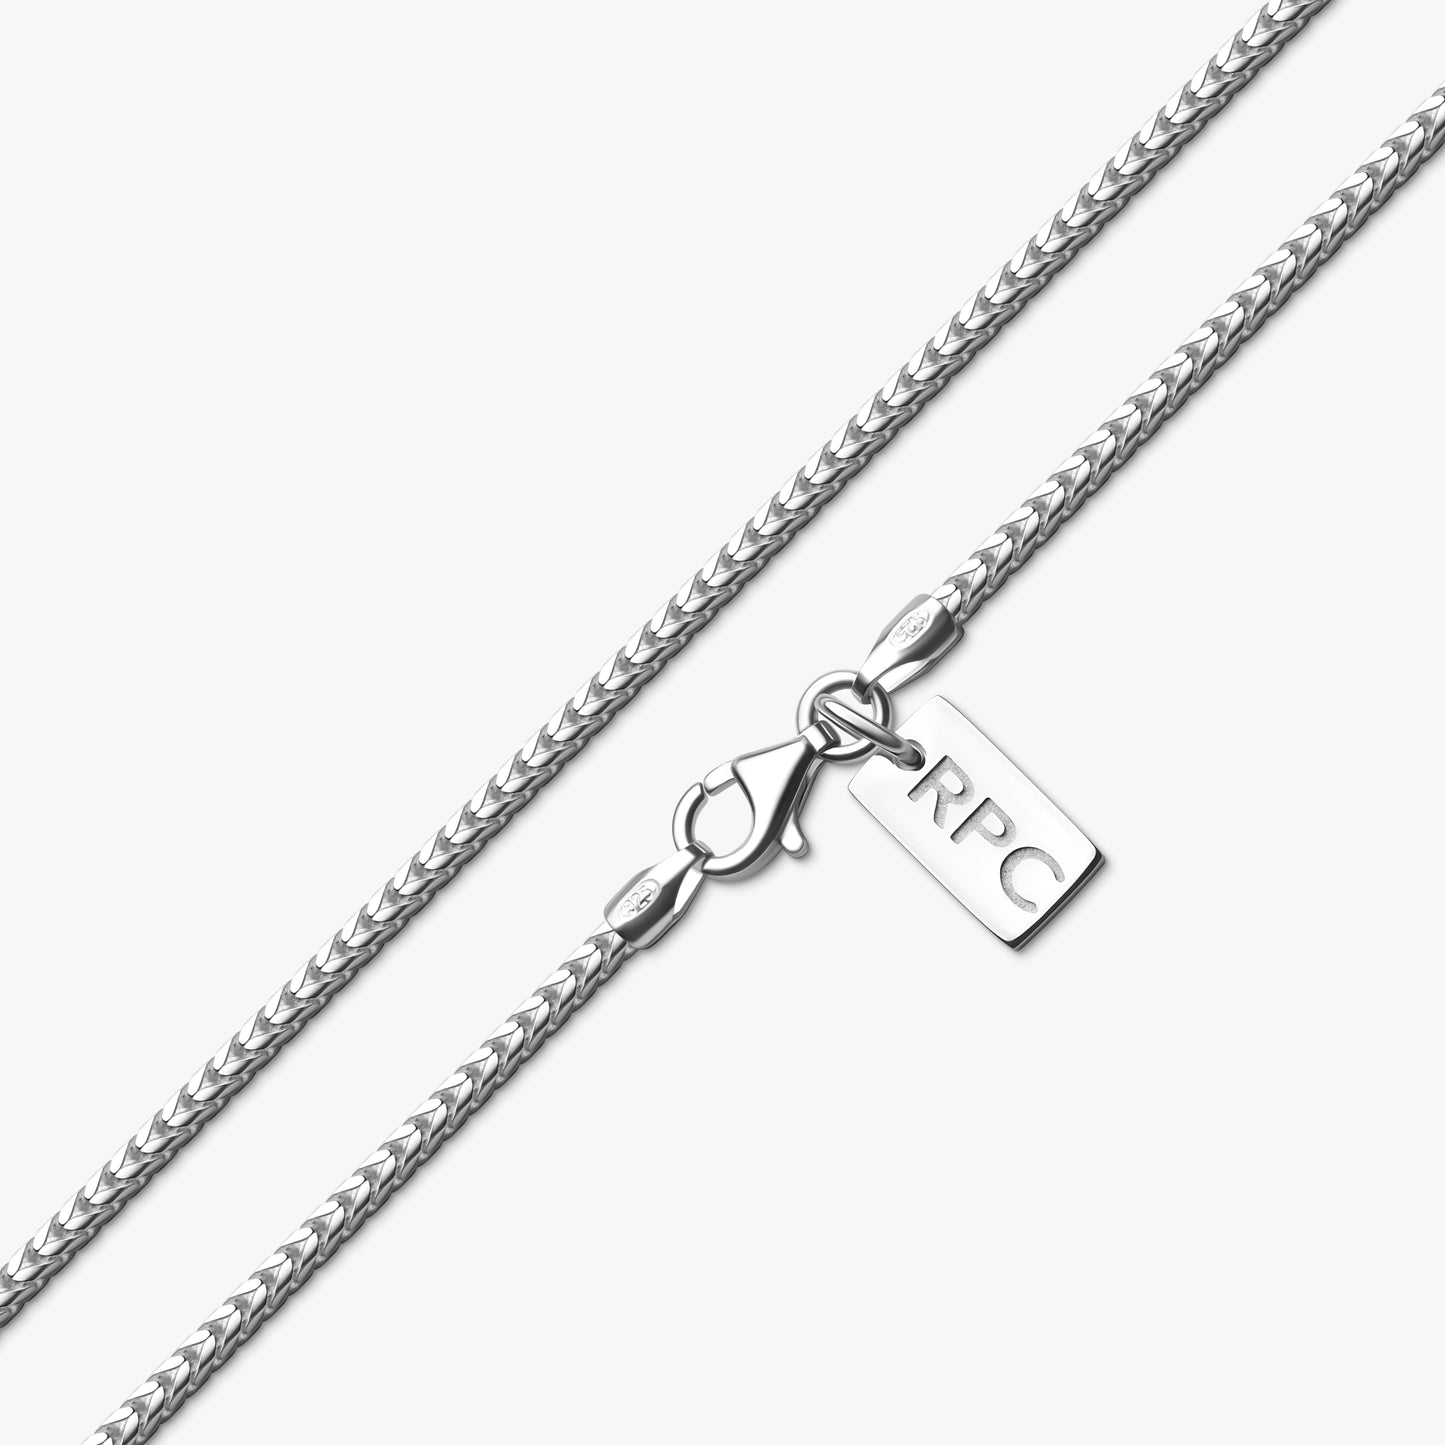 close up detail of 1.8mm sterling silver franco chain with rahul patel collection tag